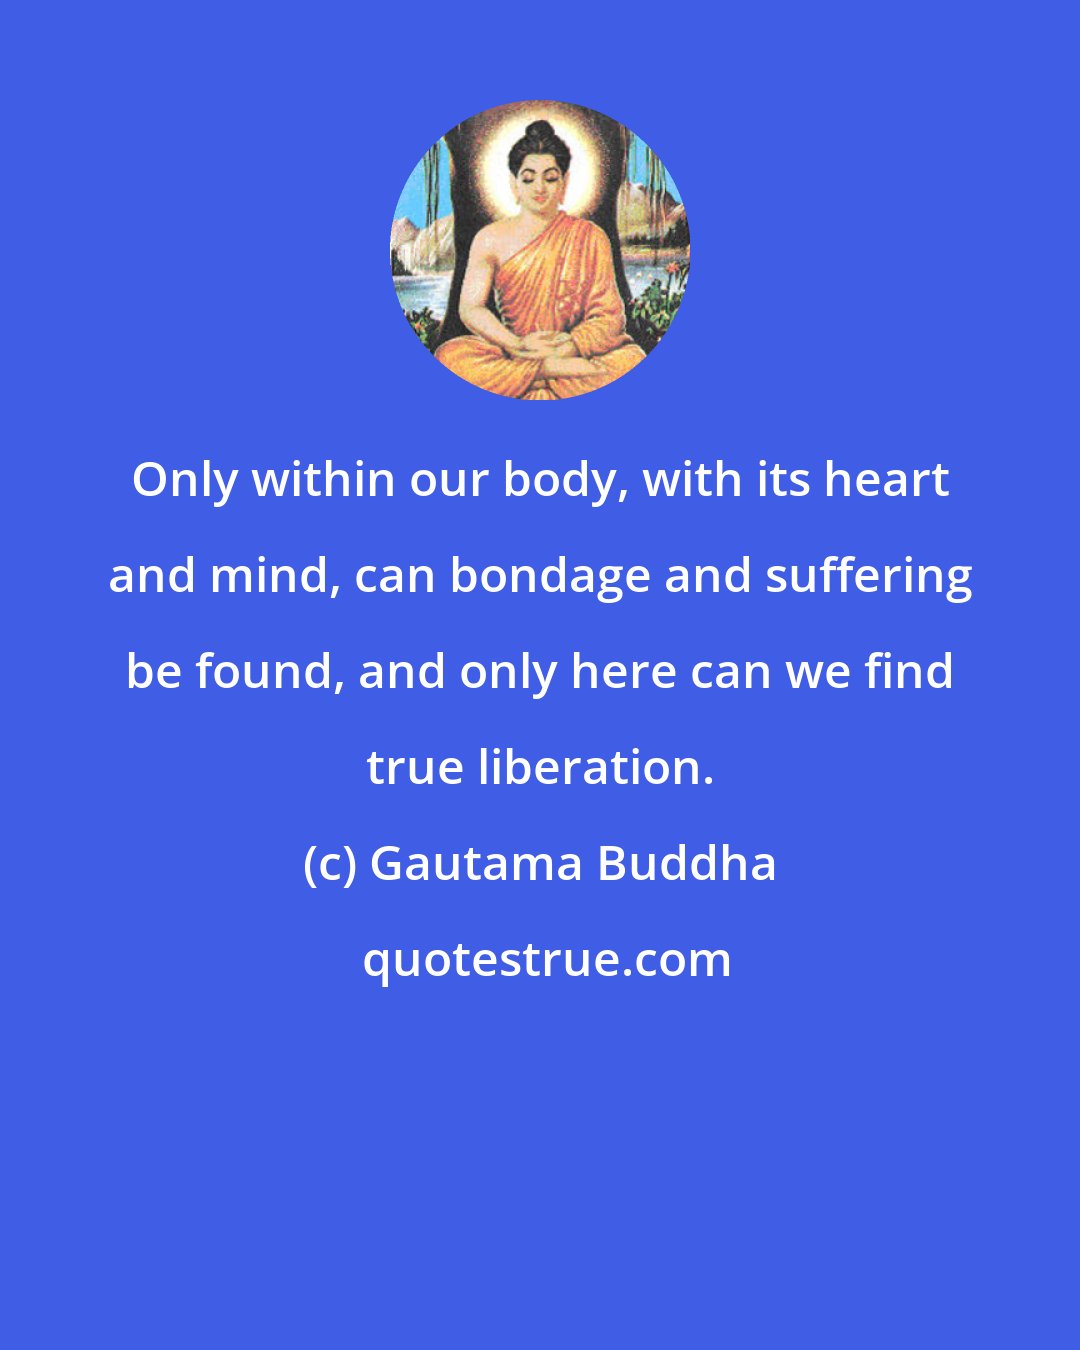 Gautama Buddha: Only within our body, with its heart and mind, can bondage and suffering be found, and only here can we find true liberation.